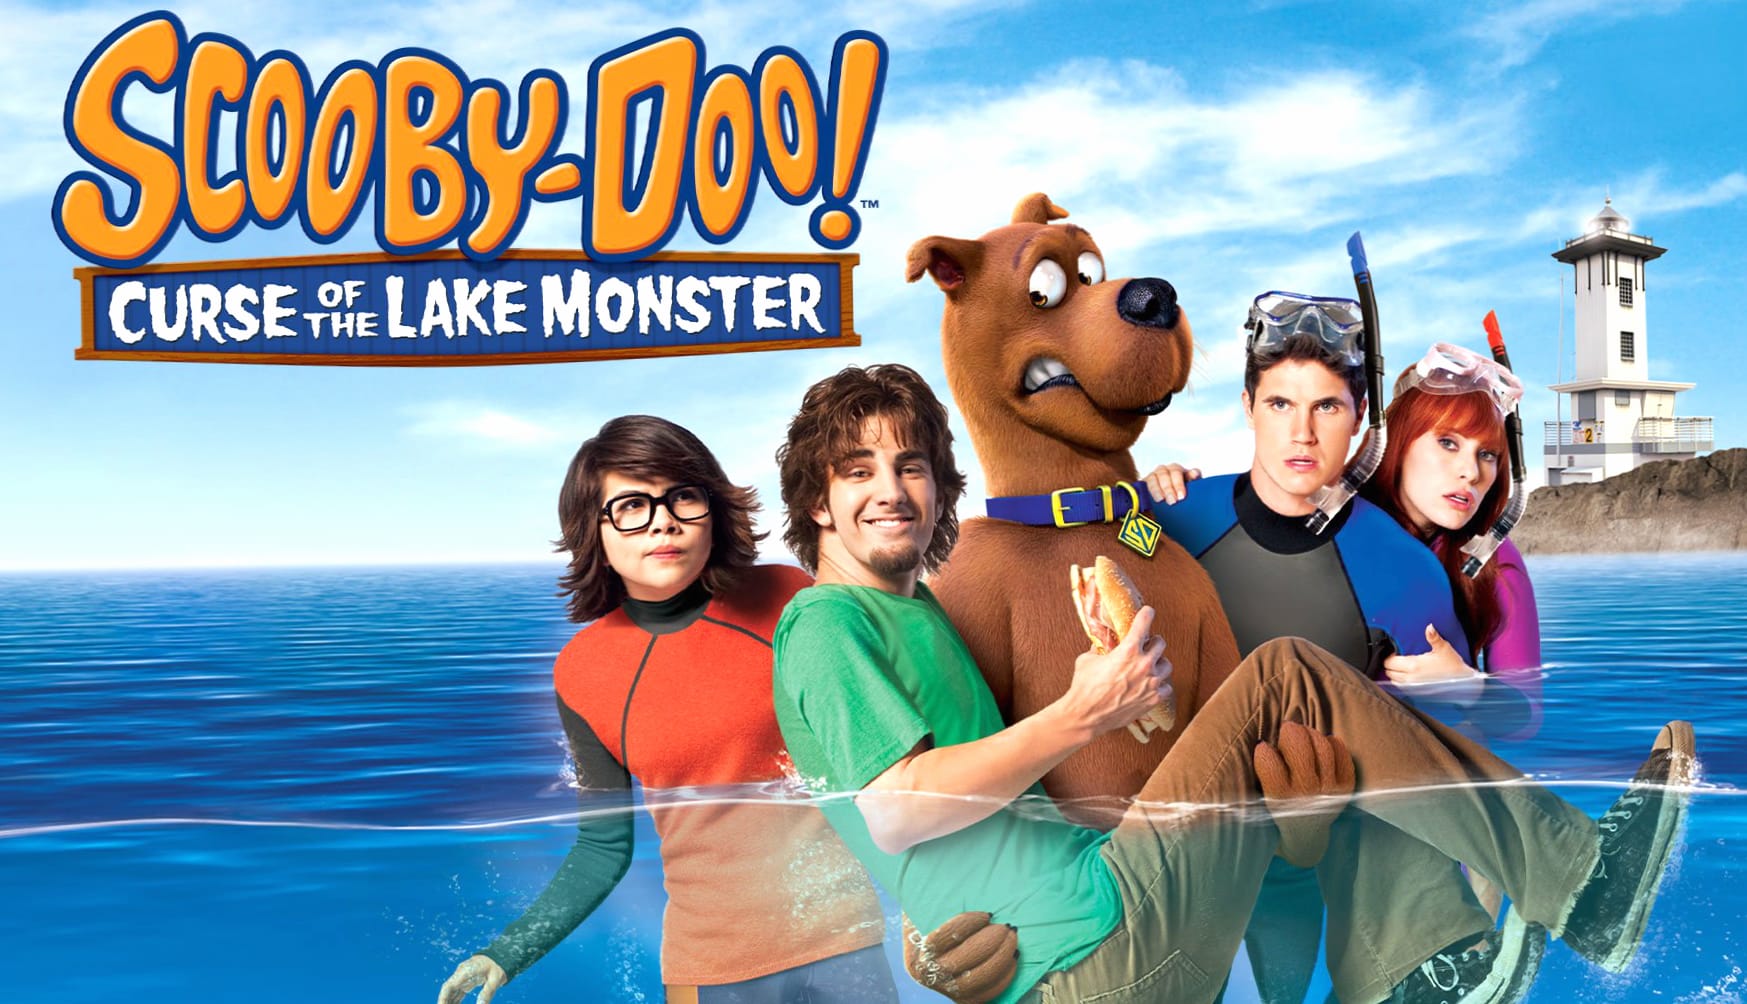 Scooby-Doo! Curse of the Lake Monster wallpapers HD quality